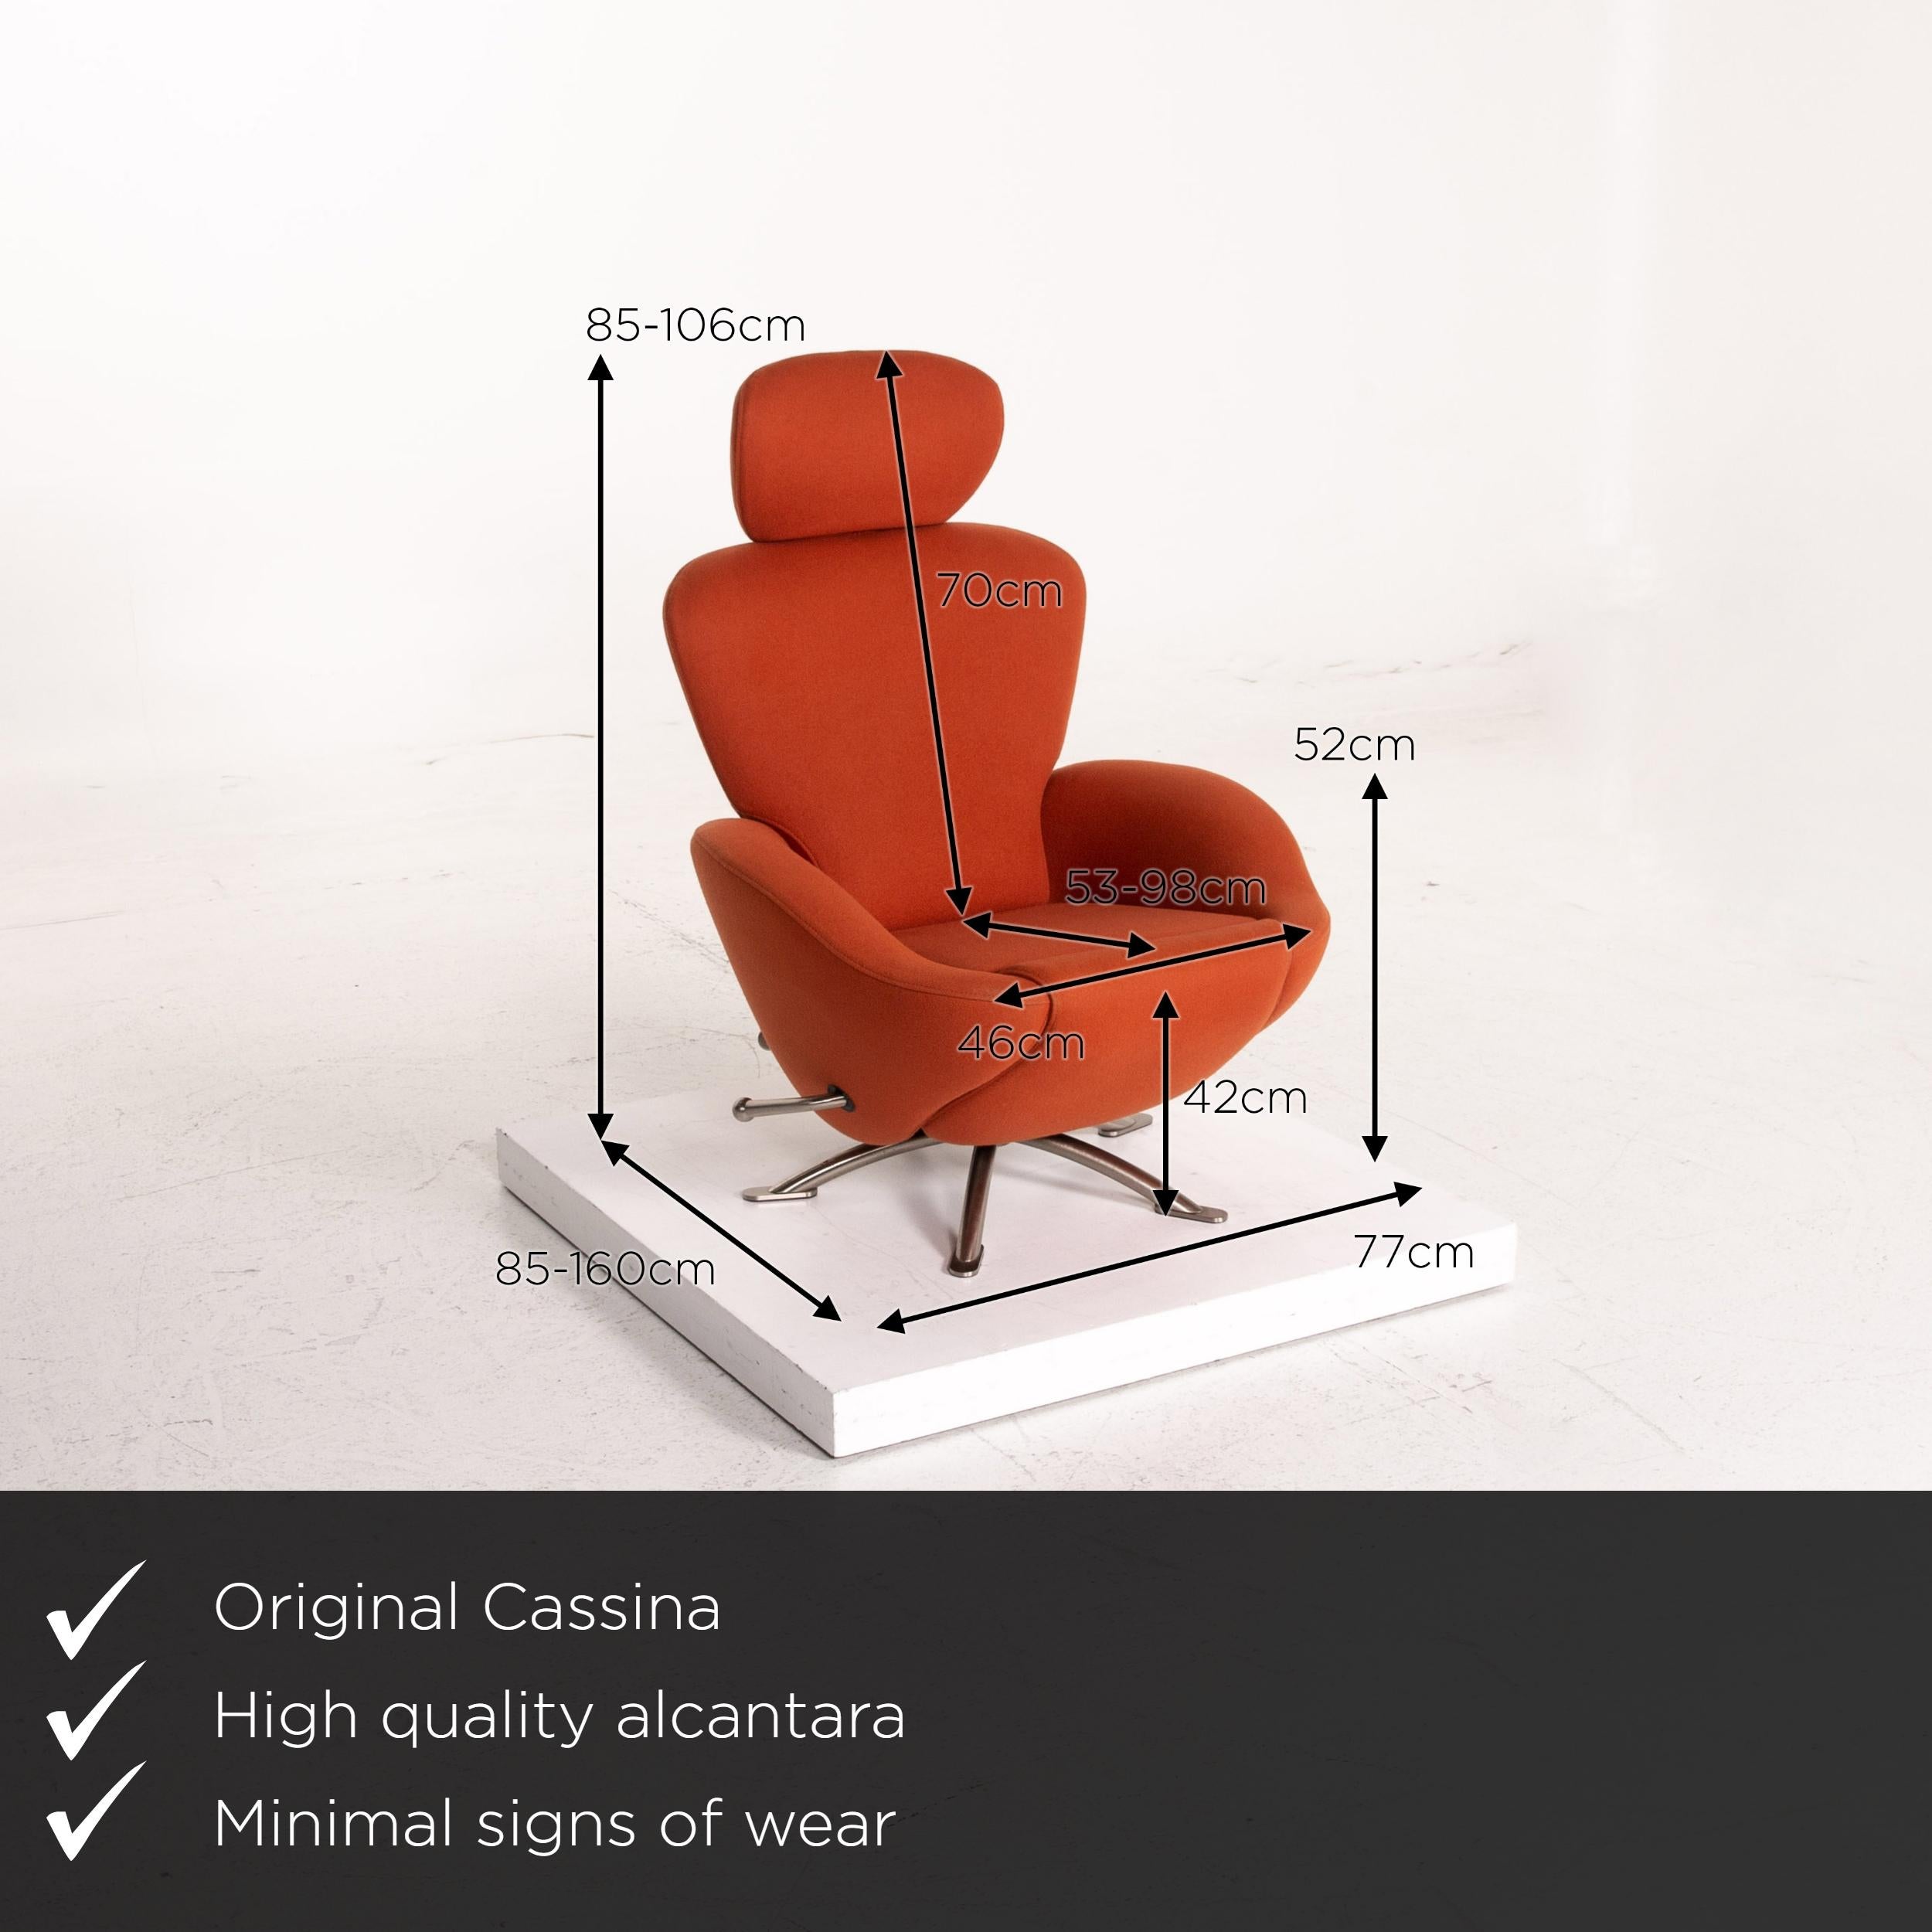 We present to you a Cassina Dodo Alcantara fabric armchair orange terracotta relax function.
 

 Product measurements in centimeters:
 

Depth: 85
Width: 77
Height: 85
Seat height: 42
Rest height: 52
Seat depth: 53
Seat width: 46
Back